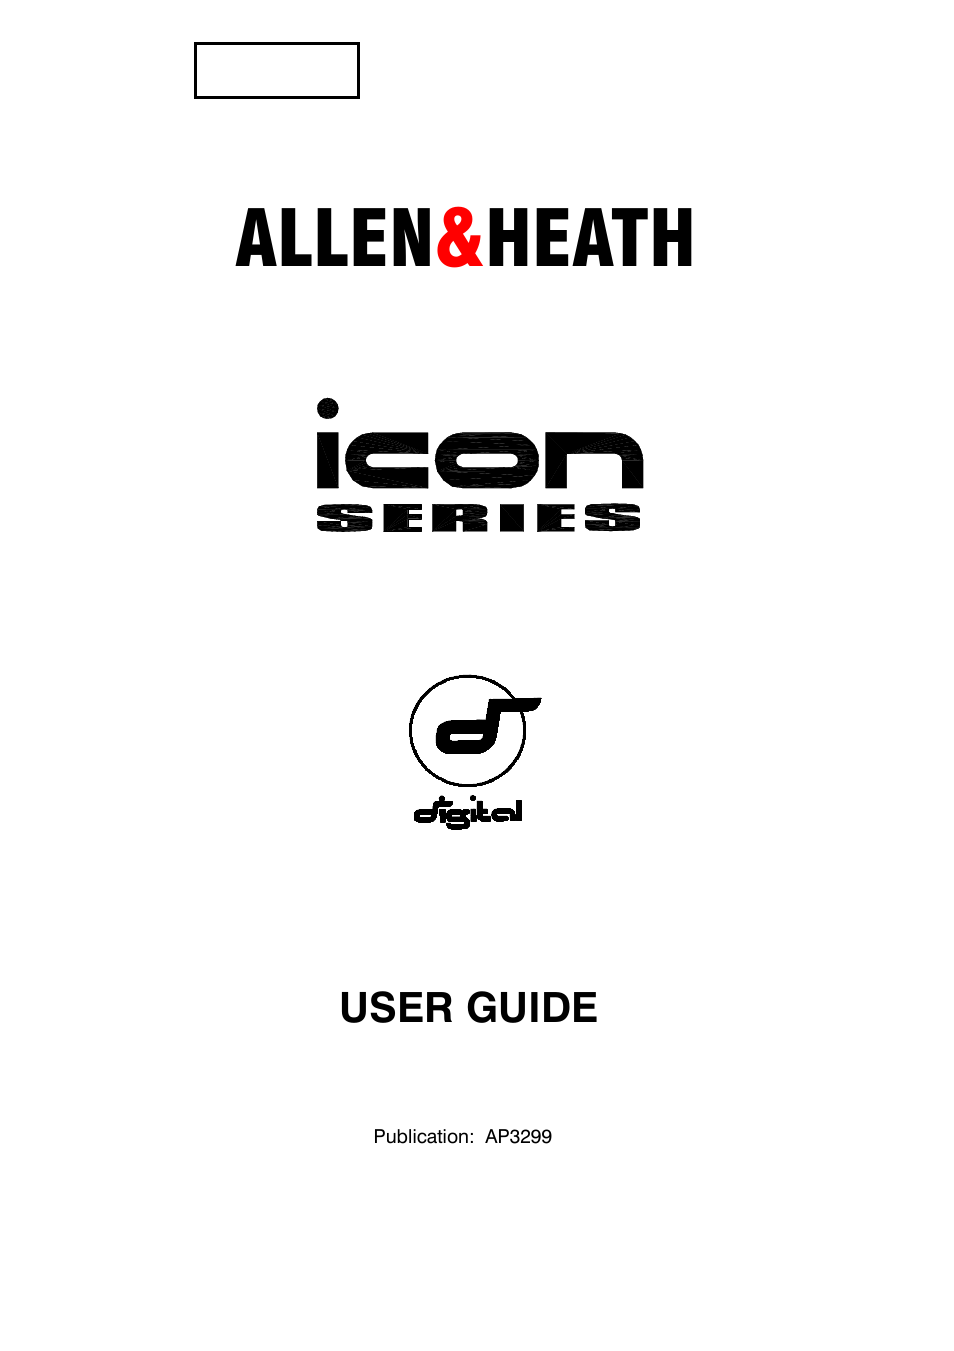 Allen&Heath DP 1000 USER GUIDE User Manual | 67 pages | Also for: DL1000  USER GUIDE, ICON User Guide